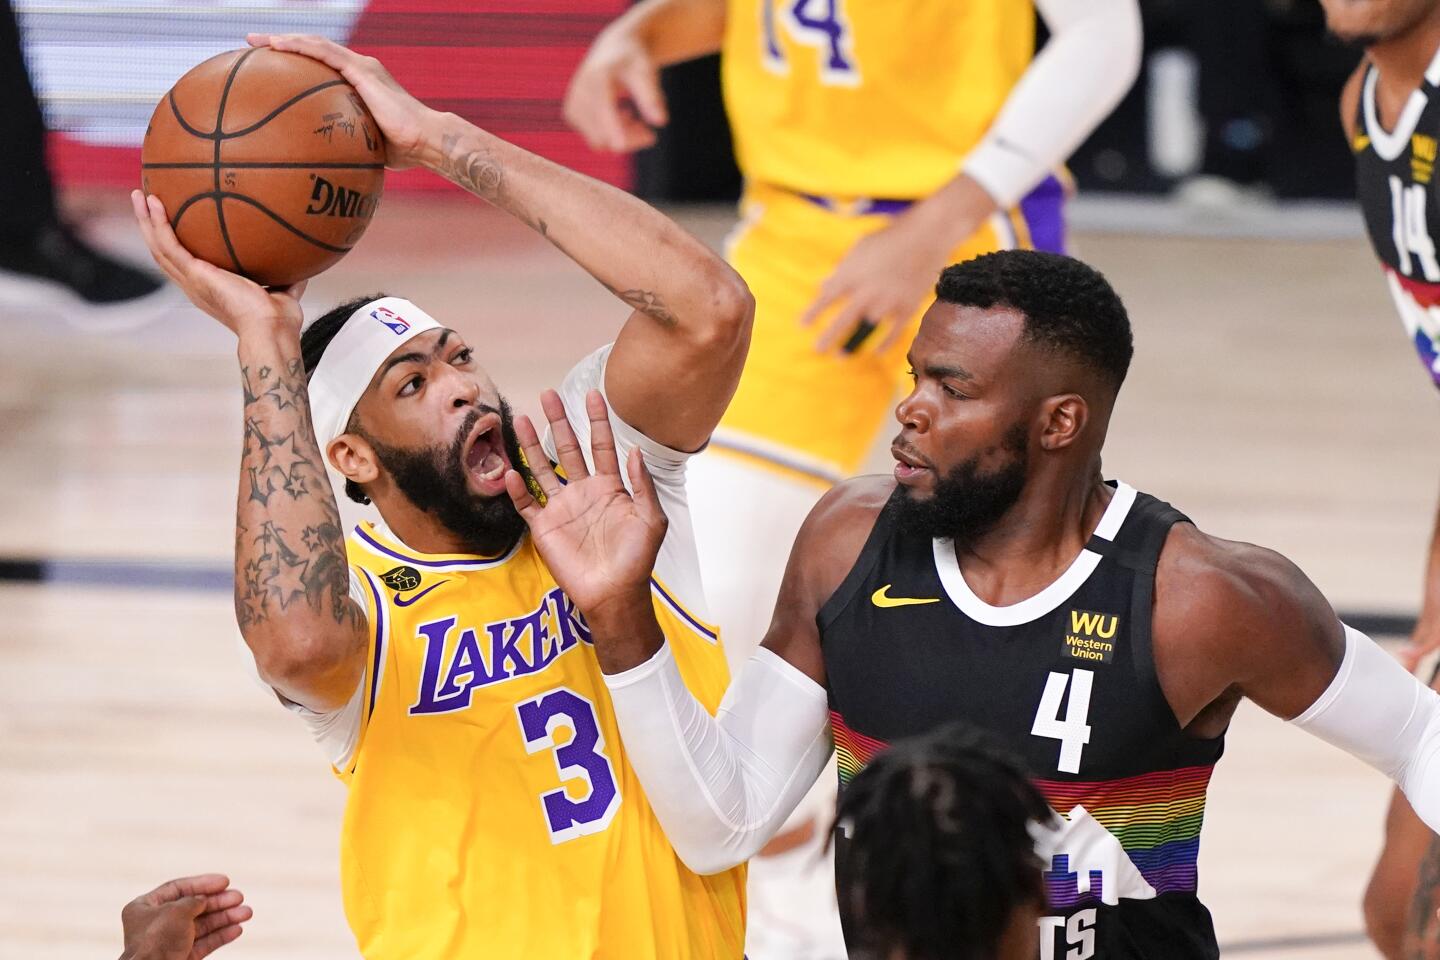 Lakers-Nuggets in Game 4